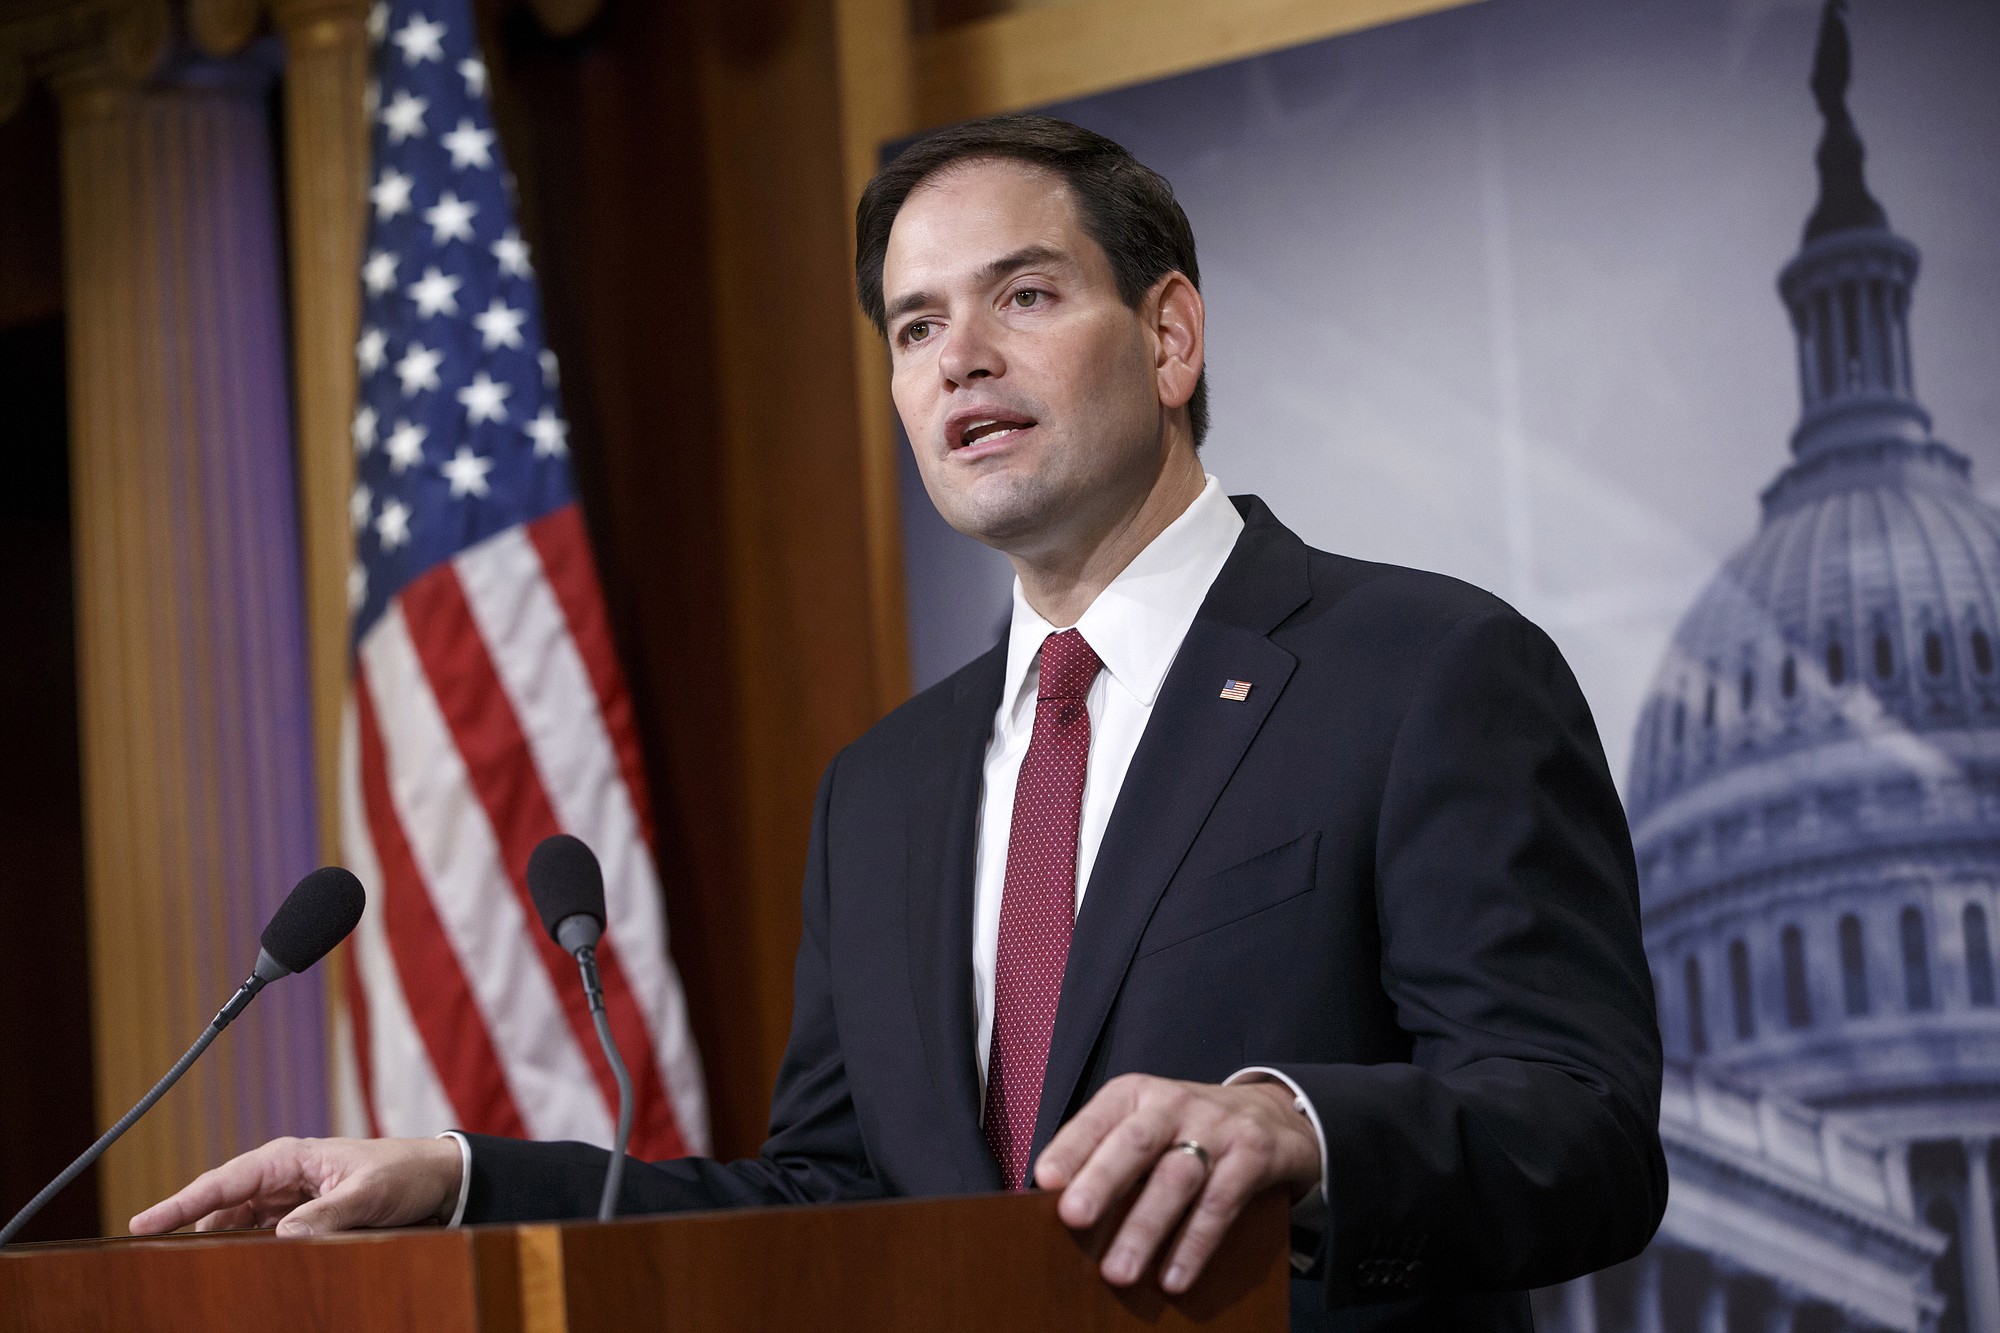 &quot;So much of the recovery over the last couple of years has gone to such a small segment of the population that now middle-class and upward-mobility stagnation has become more apparent.&quot;
Sen. Marco Rubio, R-Fla.